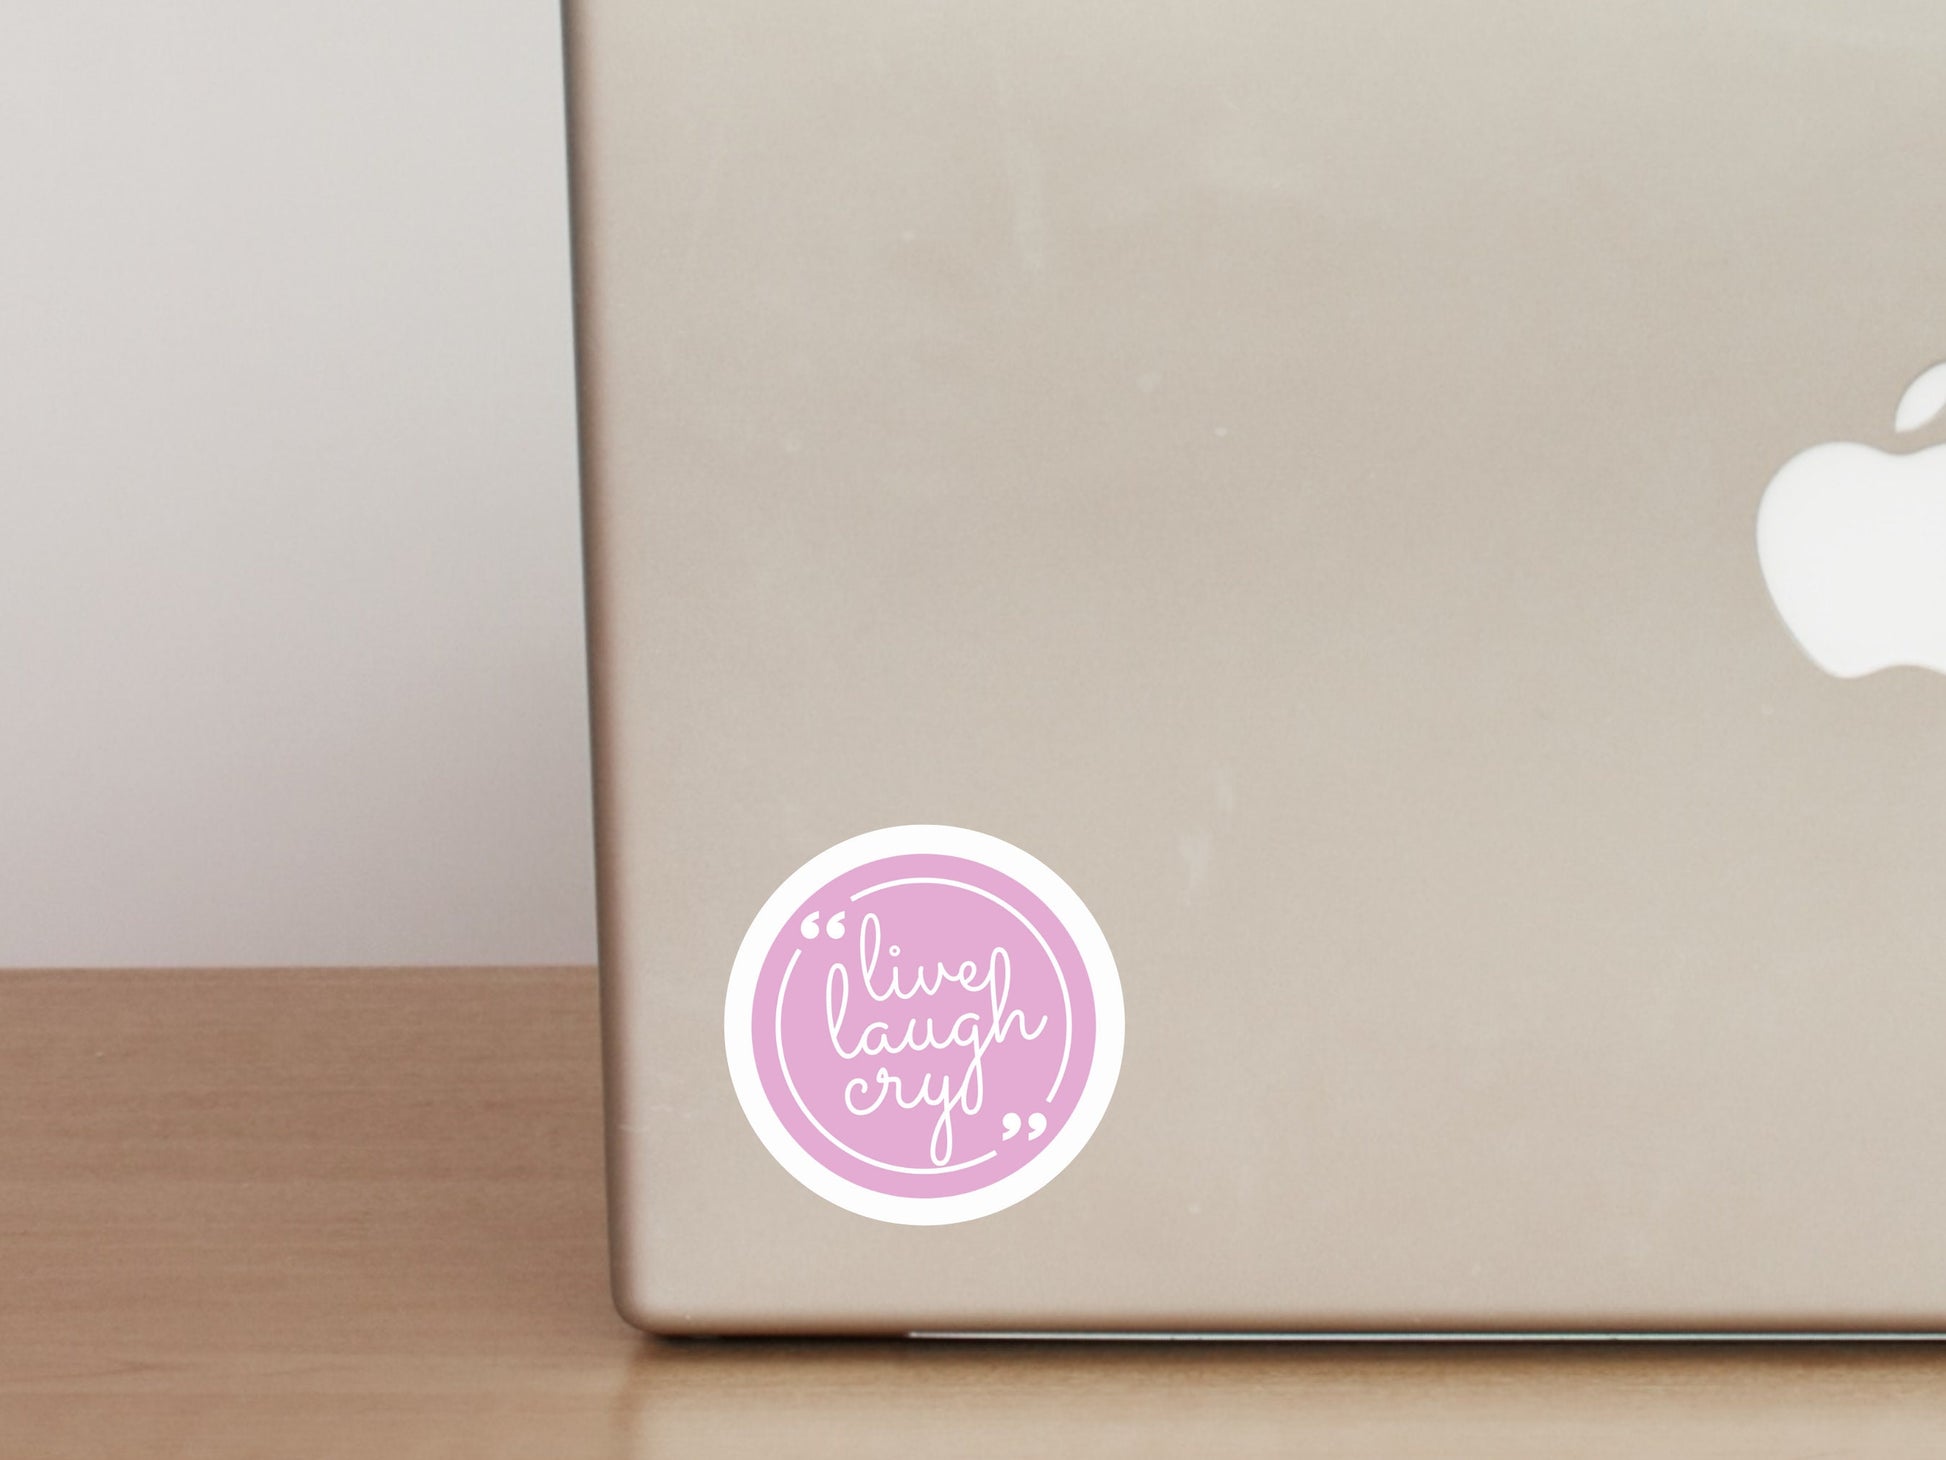 Live Laugh Cry Sticker | Sad Millennial Gifts | Funny Laptop Decals | Aesthetic Sticker